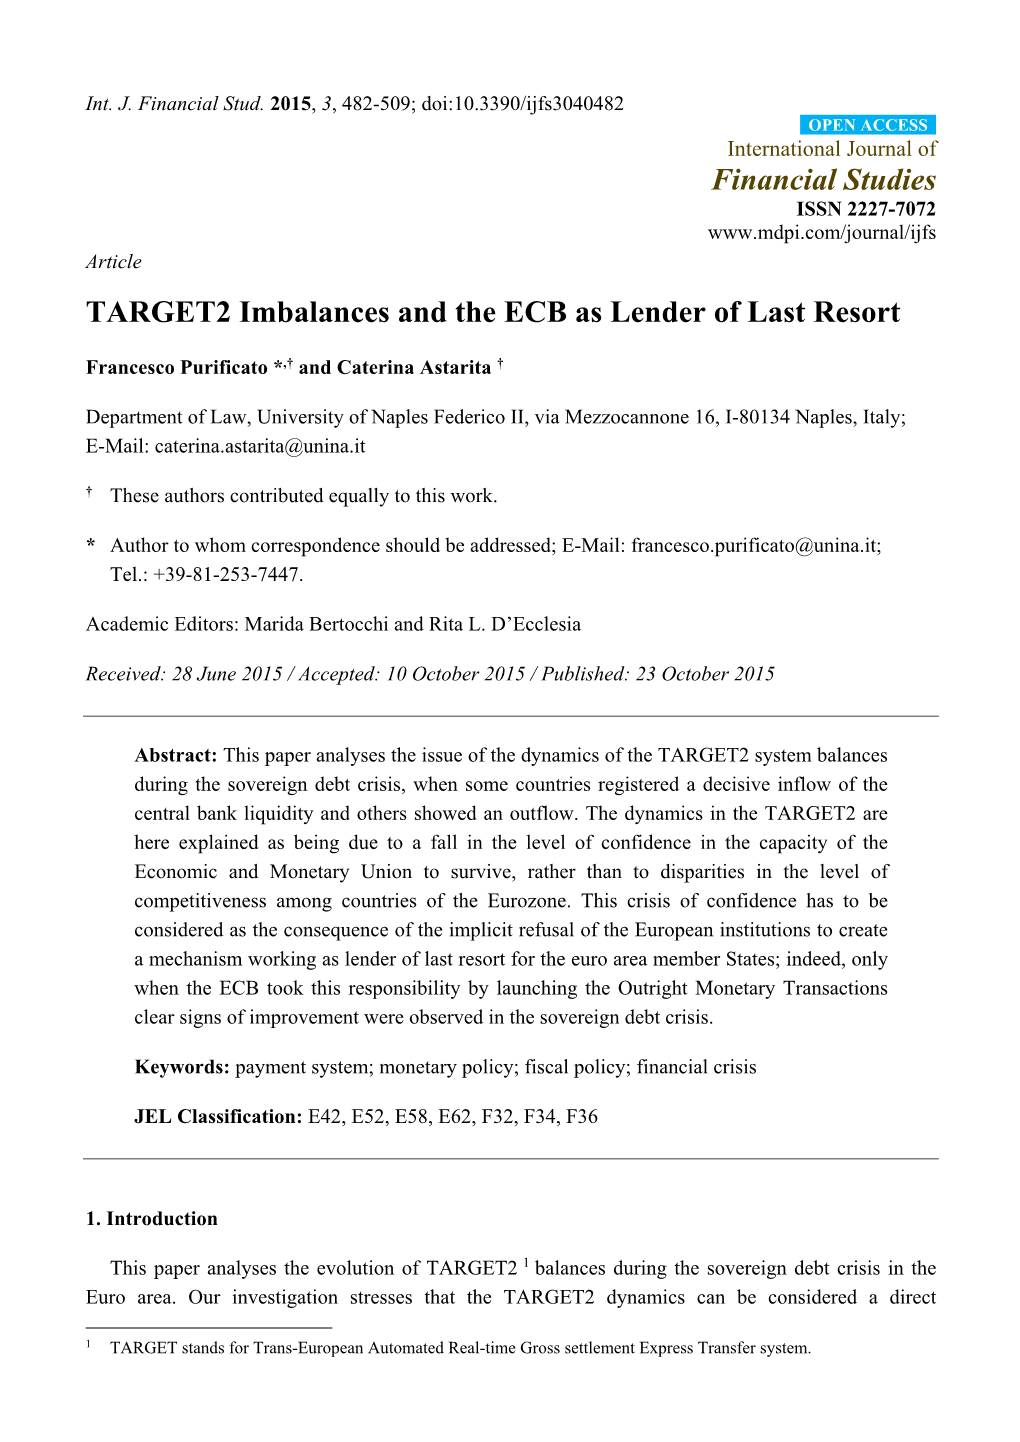 TARGET2 Imbalances and the ECB As Lender of Last Resort